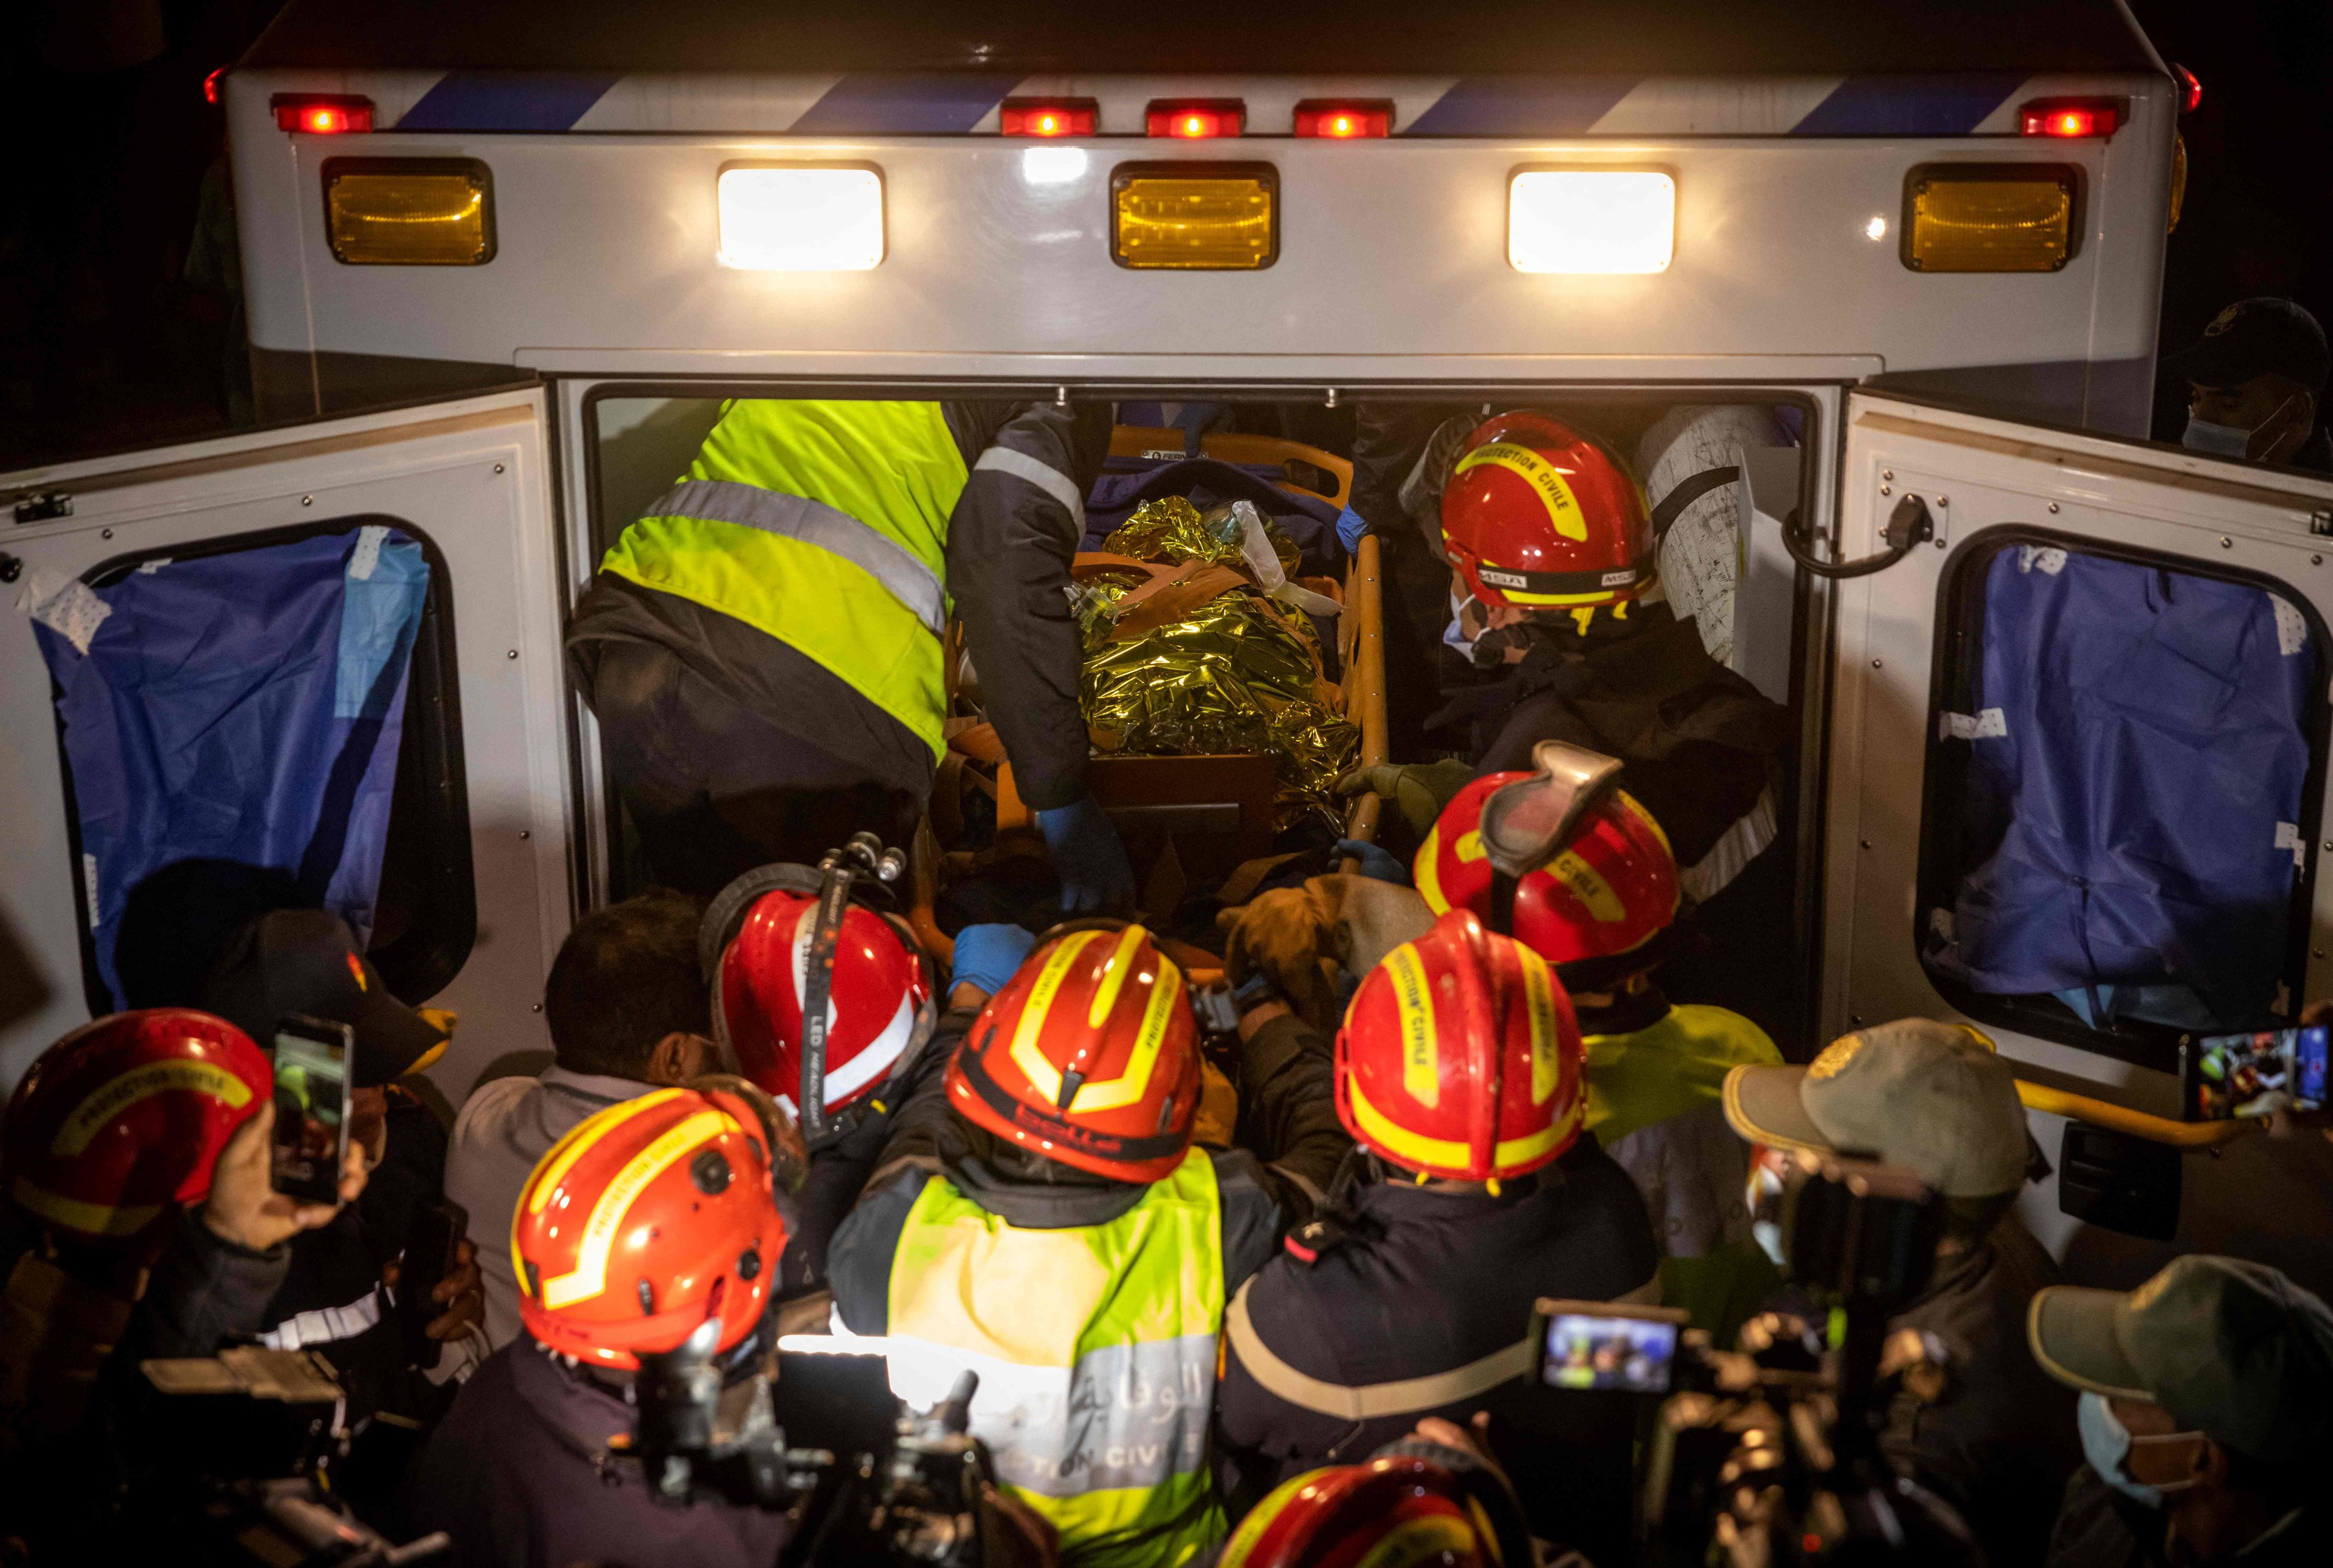 Moroccan emergency services teams carry five-year-old  lt;HIT gt;Rayan lt;/HIT gt; Oram into an ambulance after pulling him from a well shaft he fell into on February 1, in the remote village of Ighrane in the rural northern province of Chefchaouen on February 5, 2022. - Moroccan rescue crews found the five-year-old boy dead at the bottom of a well late on Februay 5, in a tragic end to a painstaking five-day operation that has gripped the nation. (Photo by Fadel SENNA / AFP)